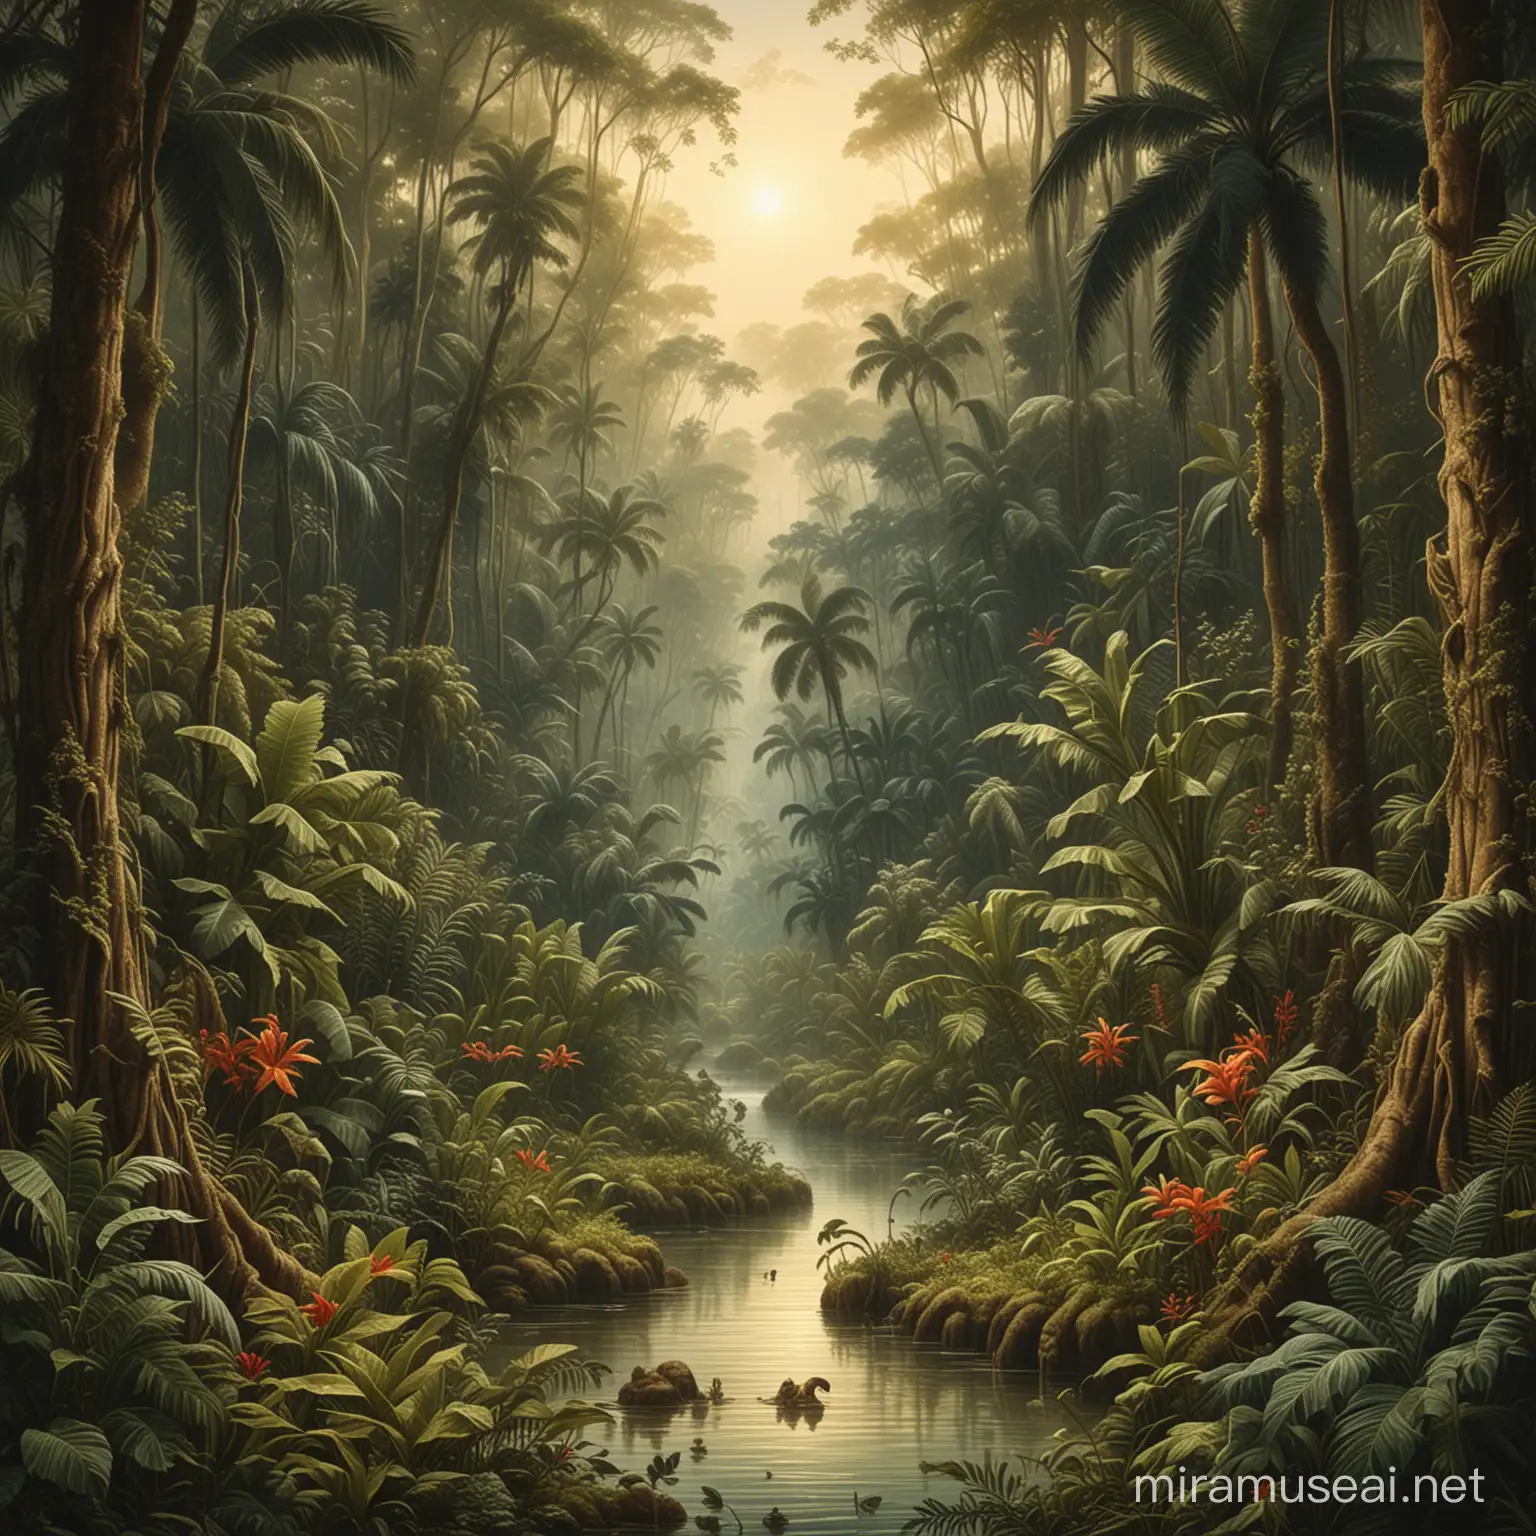 A picture of a jungle landscape in the style of the Dore Bible's art